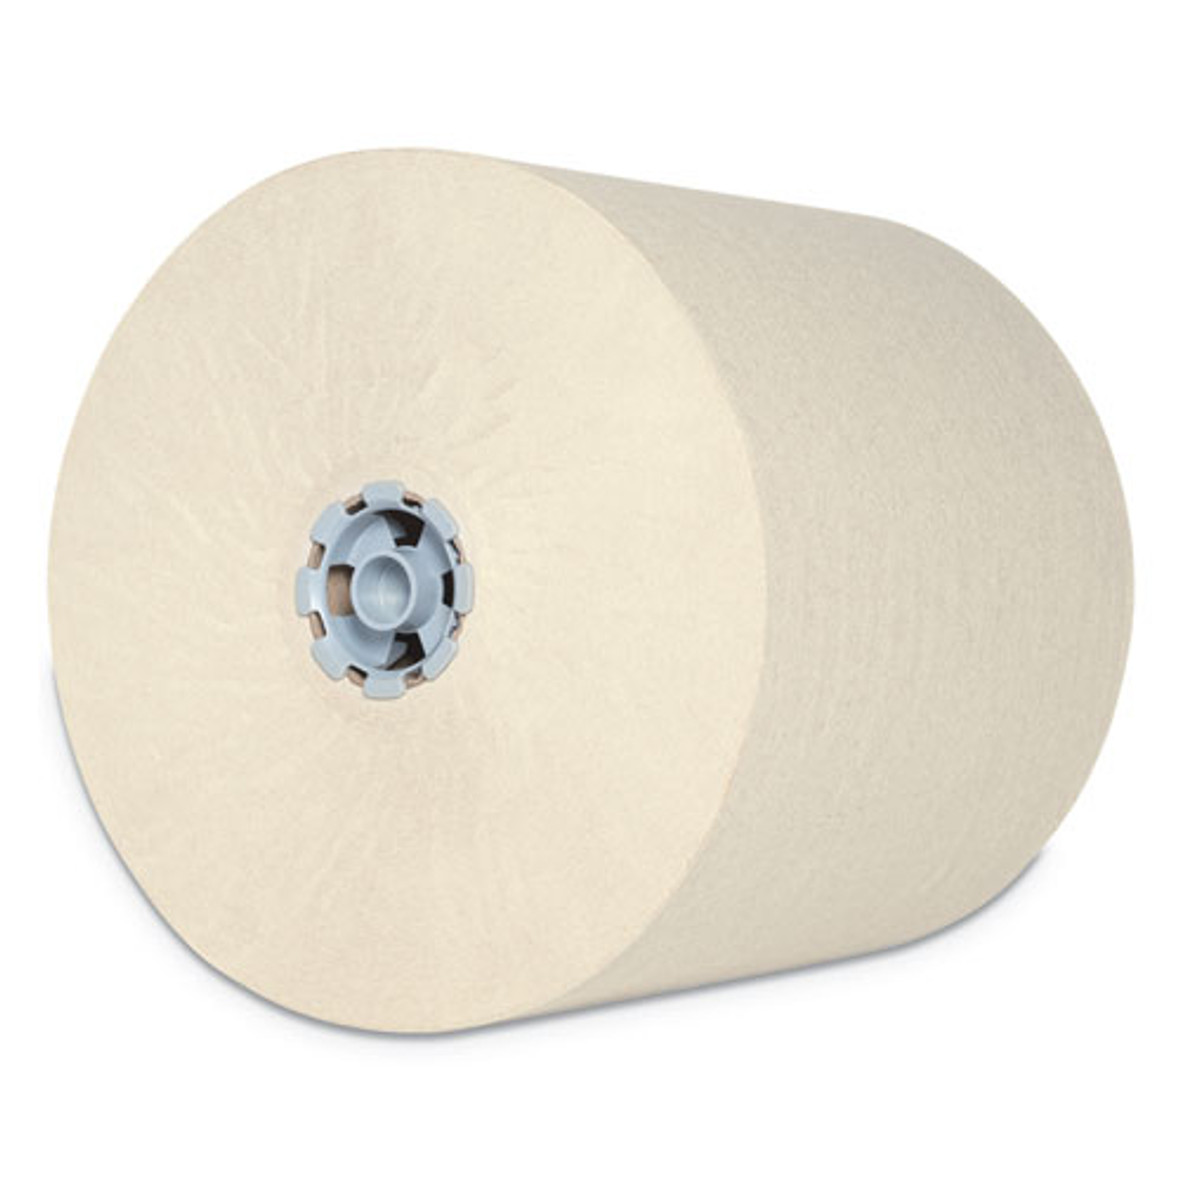 Pro Hard Roll Paper Towels With Absorbency Pockets, For Scott Pro Dispenser, Gray Core Only, 900 Ft Roll, 6 Rolls/carton